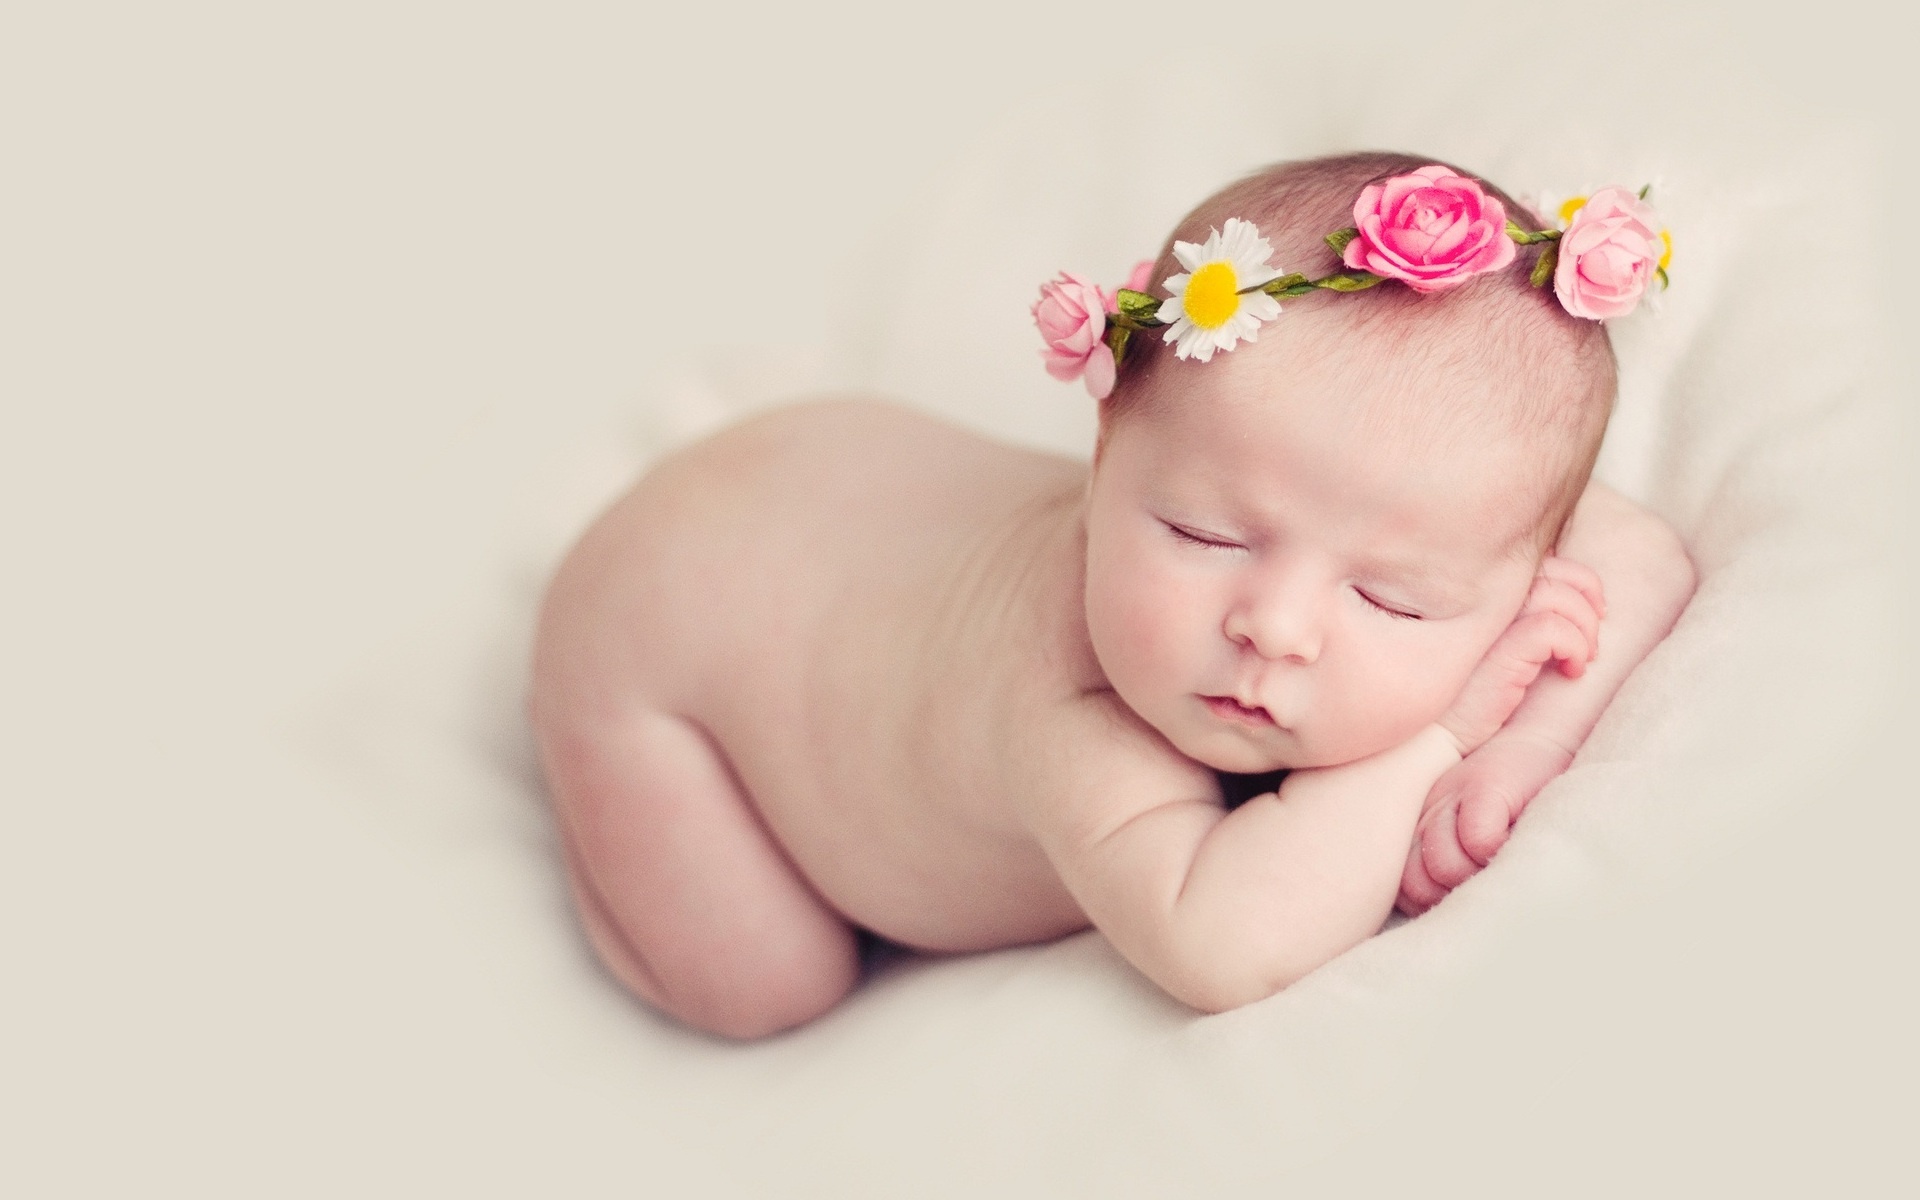 30 Cute Baby Pictures